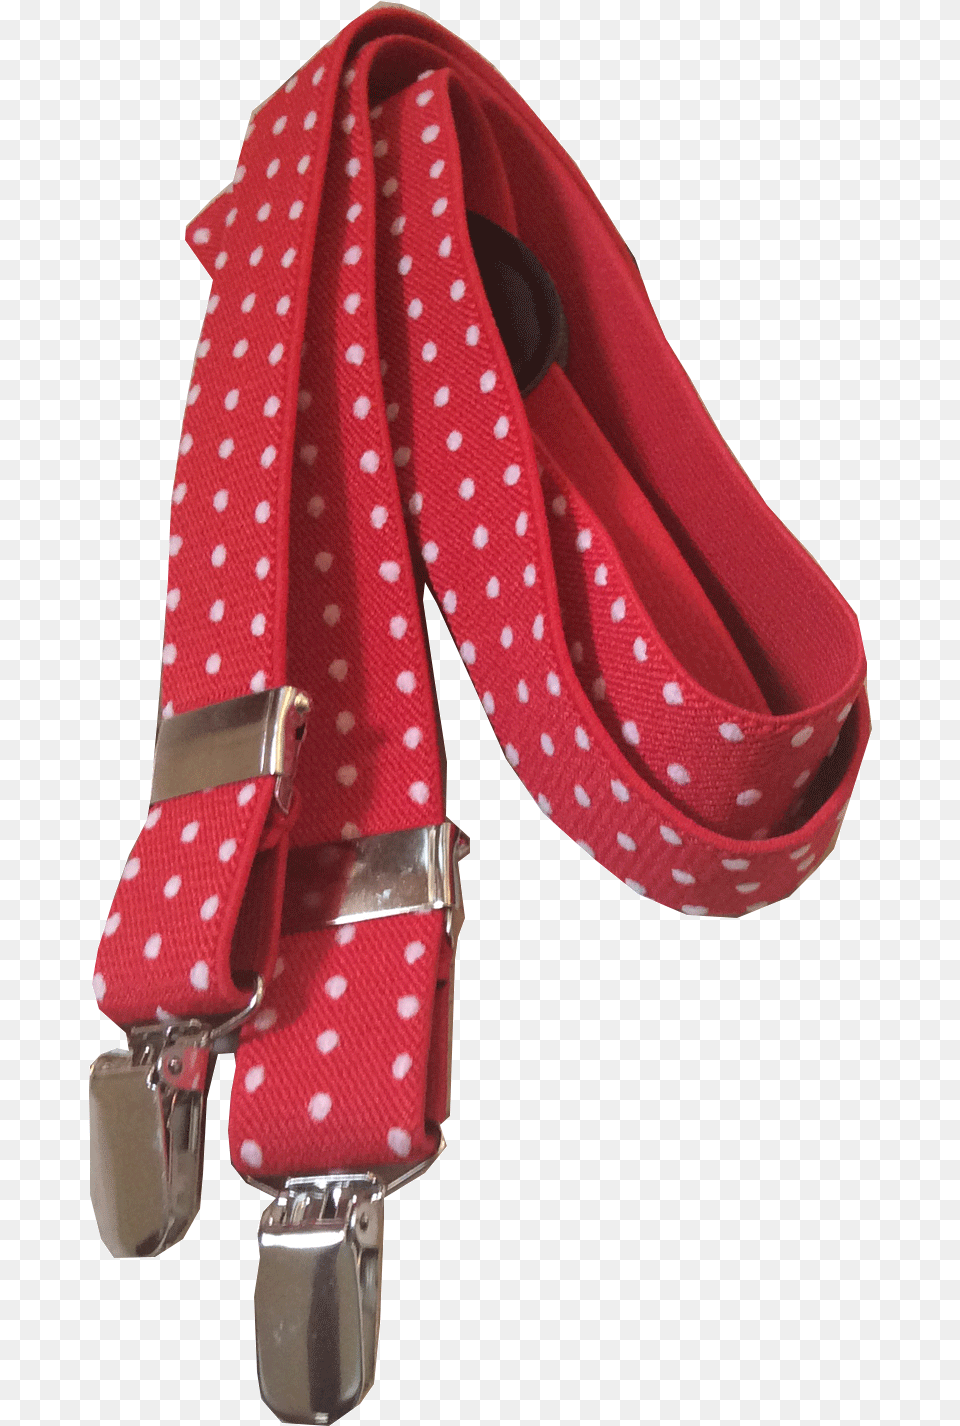 Red Amp White Polka Dot Suspender Belt, Accessories, Leash Free Png Download